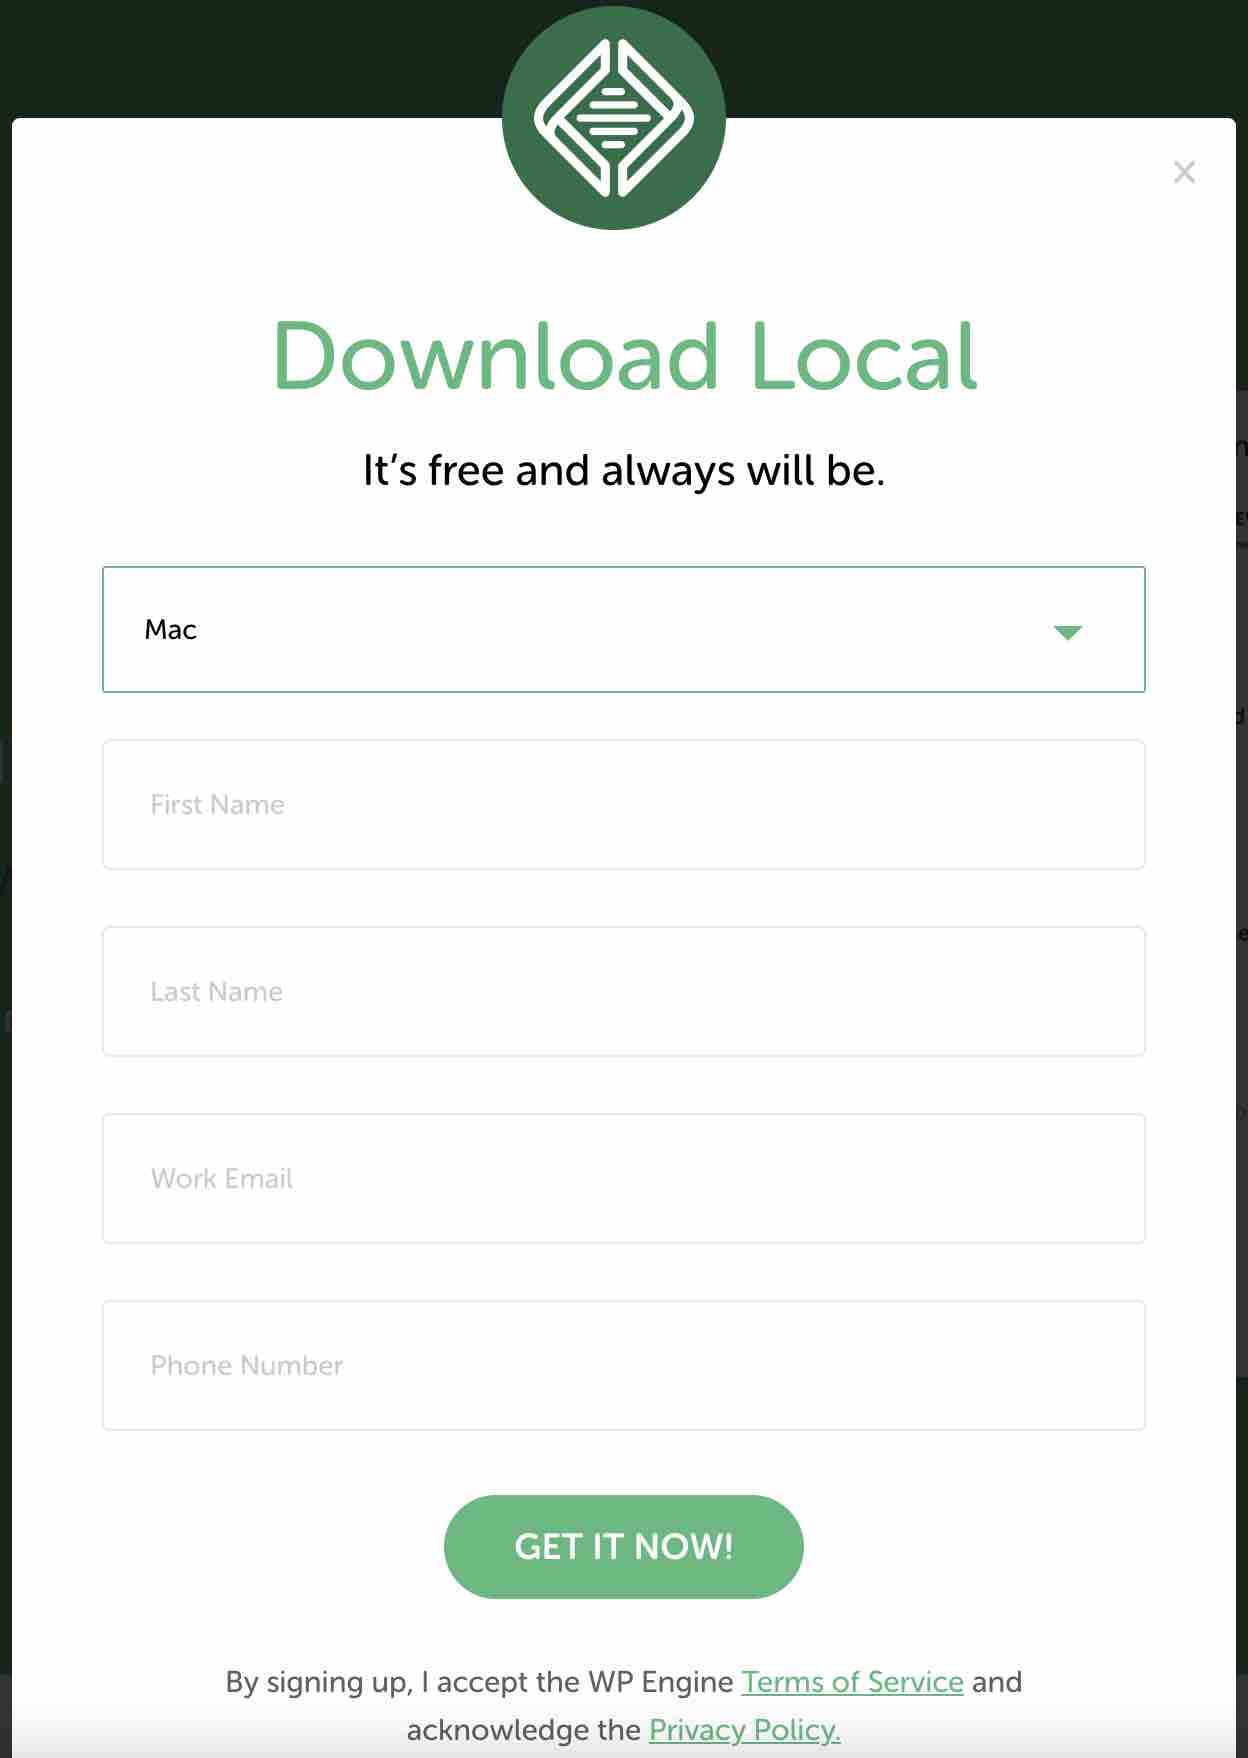 Download Local for free to install WordPress on your computer.